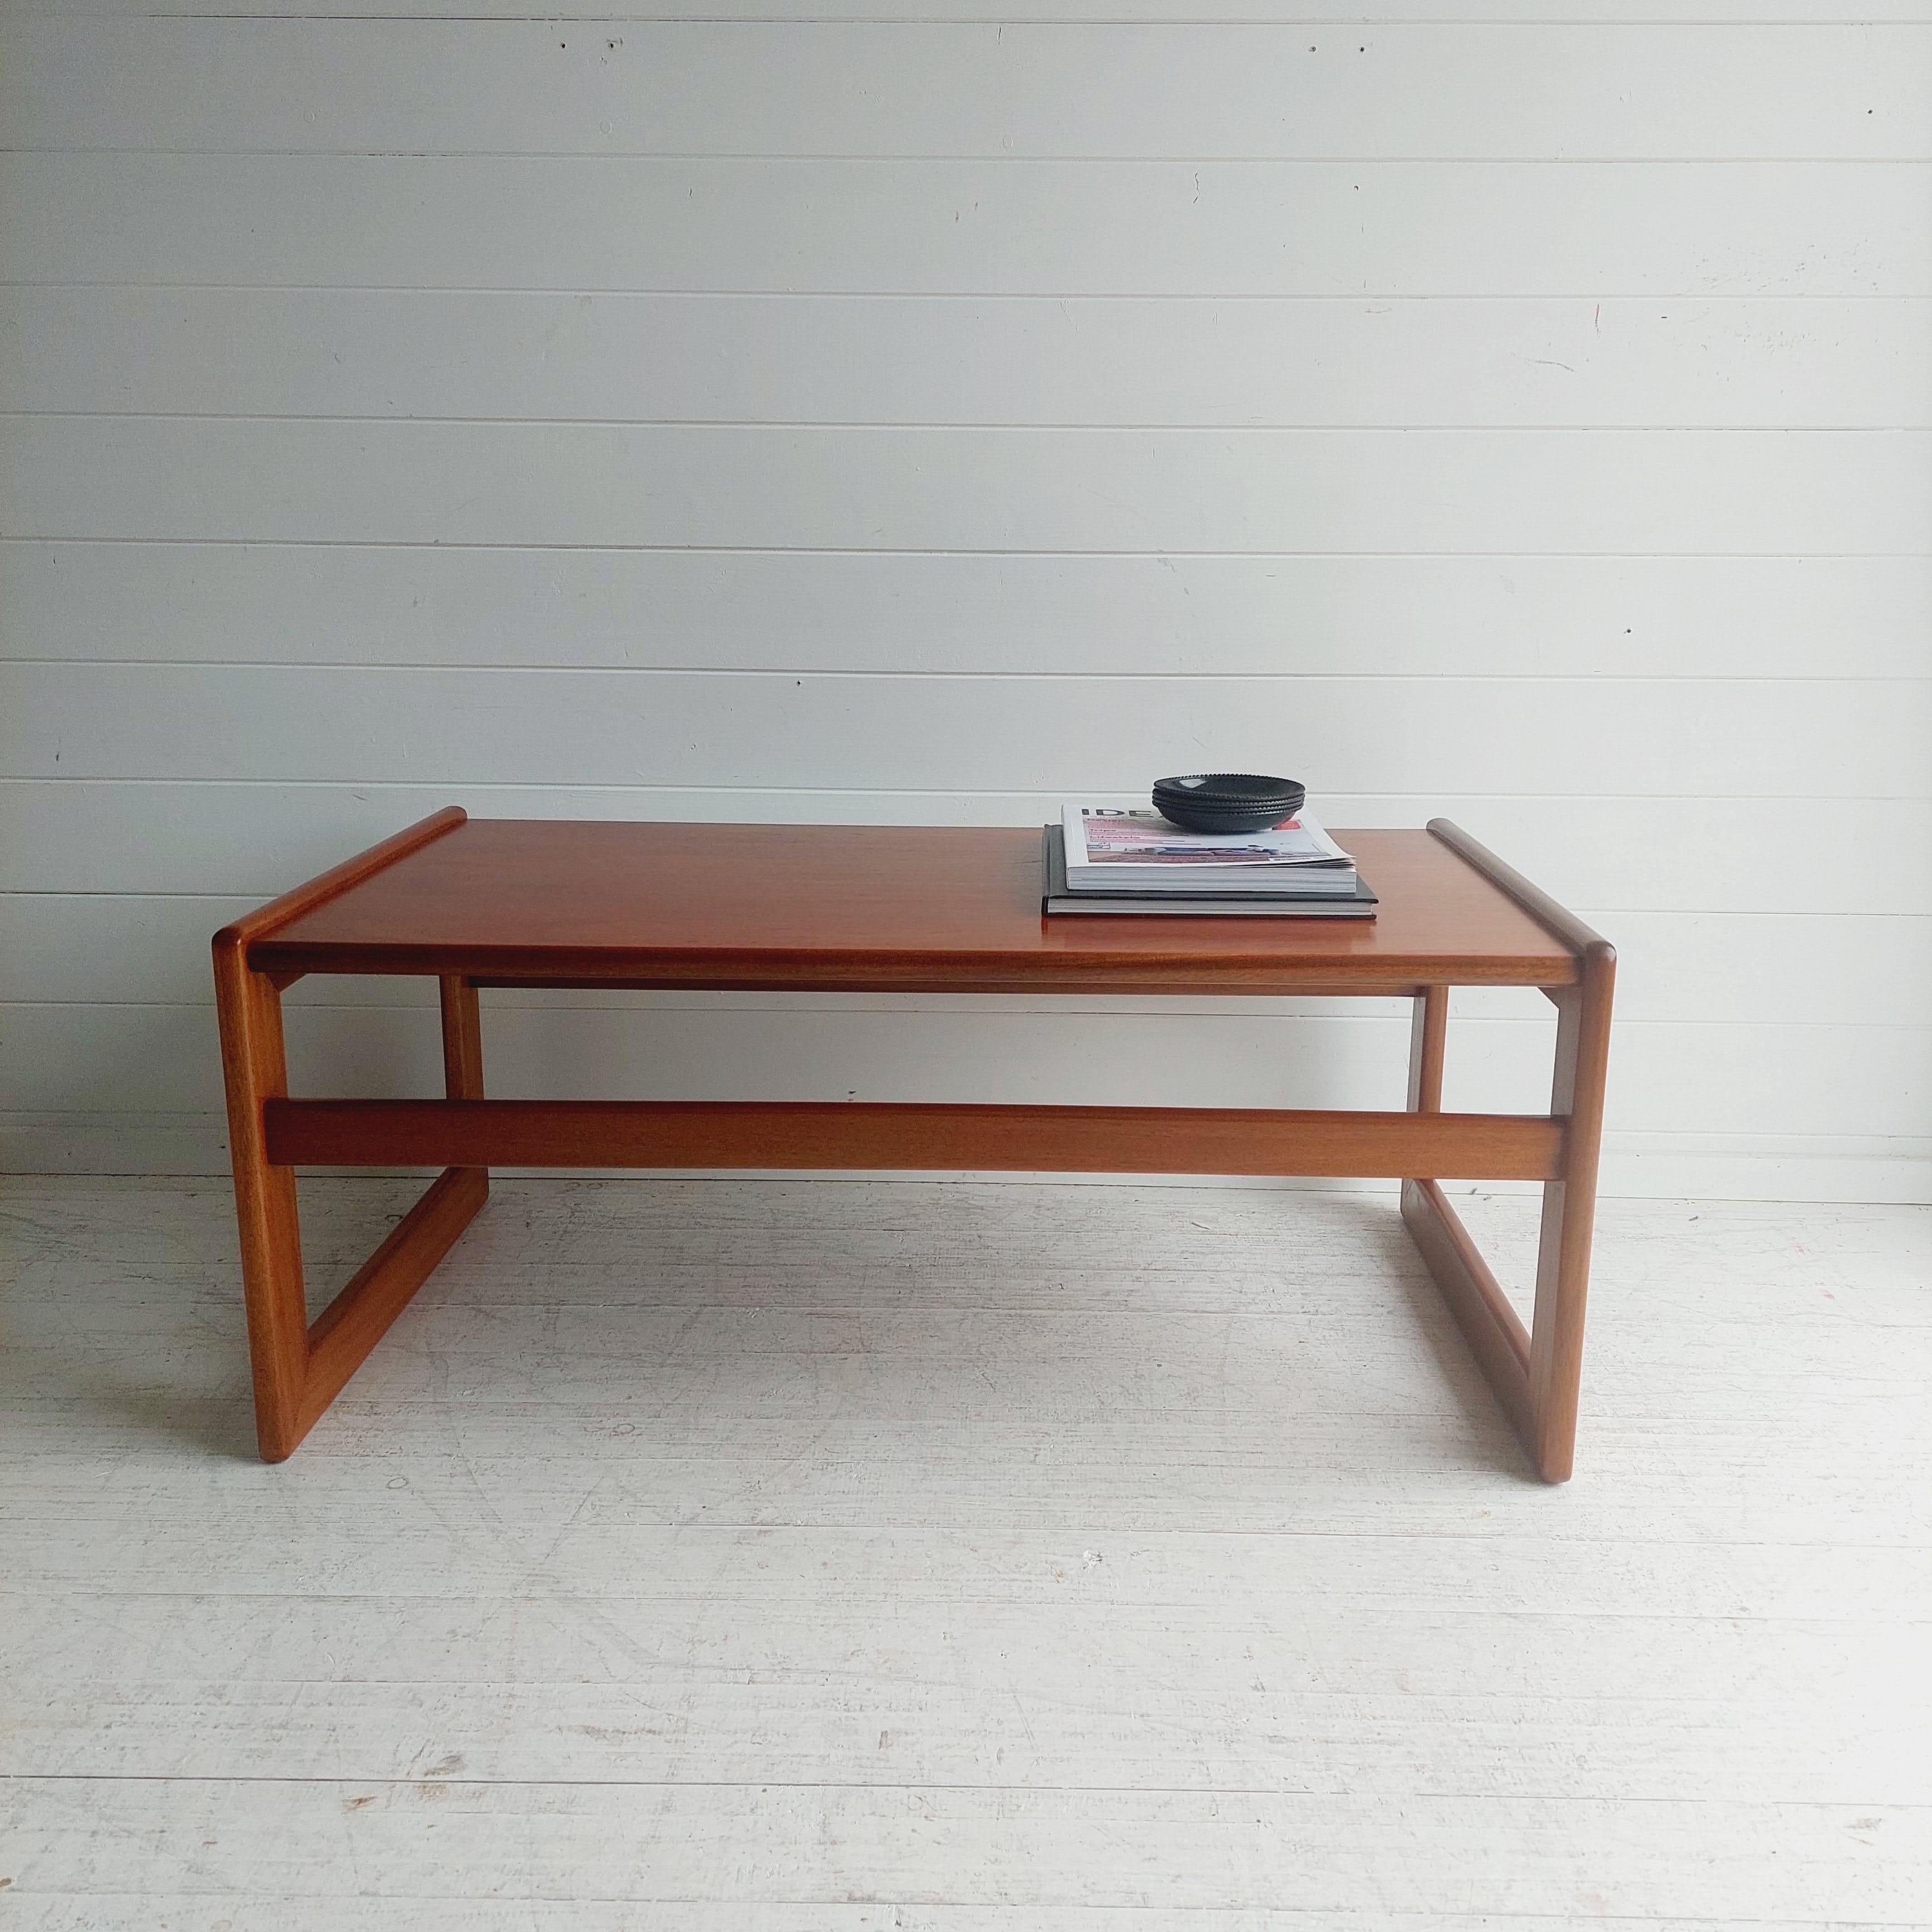 A 1960's teak coffee table designed in the style of Arne Hovmand Olsen afor Mogens Kold, Denmark. 

A very elegant design with beautiful styled modulars leg style base.
The table has been totally restored and look stunning, the grain is really